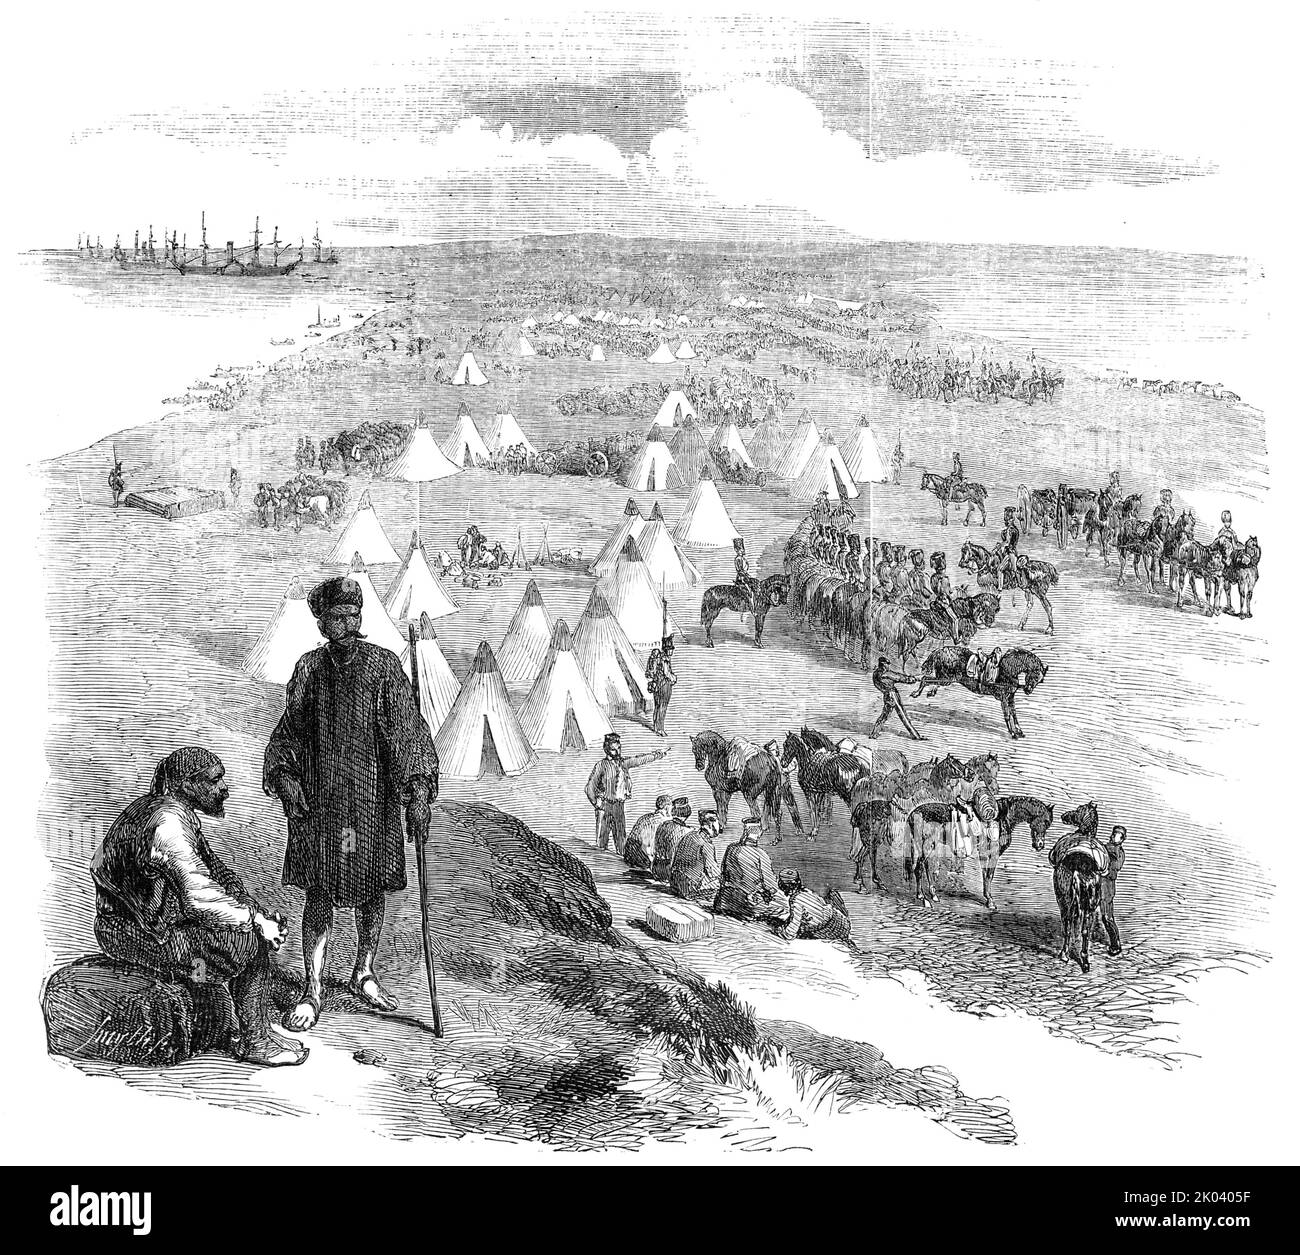 English Encampment on the Coast near Toula, in the Crimea, 1854. Crimean War: British military camp at the time the Battle of the Alma was fought. 'Captain Monck, of the 7th Fusiliers, was shot by a wounded Russian, to whom he was giving some water. Captain Dew was killed by a cannon-ball - his head cut clean off; Lieut. Cockerell was wounded in the leg by a shot which had passed through his horse; it was amputated, and he died. He was a splendid fellow. Lieut. Walsham, who ascended Mont Blanc, fell most gloriously. A gunner, who was sponging a gun, being shot in the arm, Walsham said to him, Stock Photo